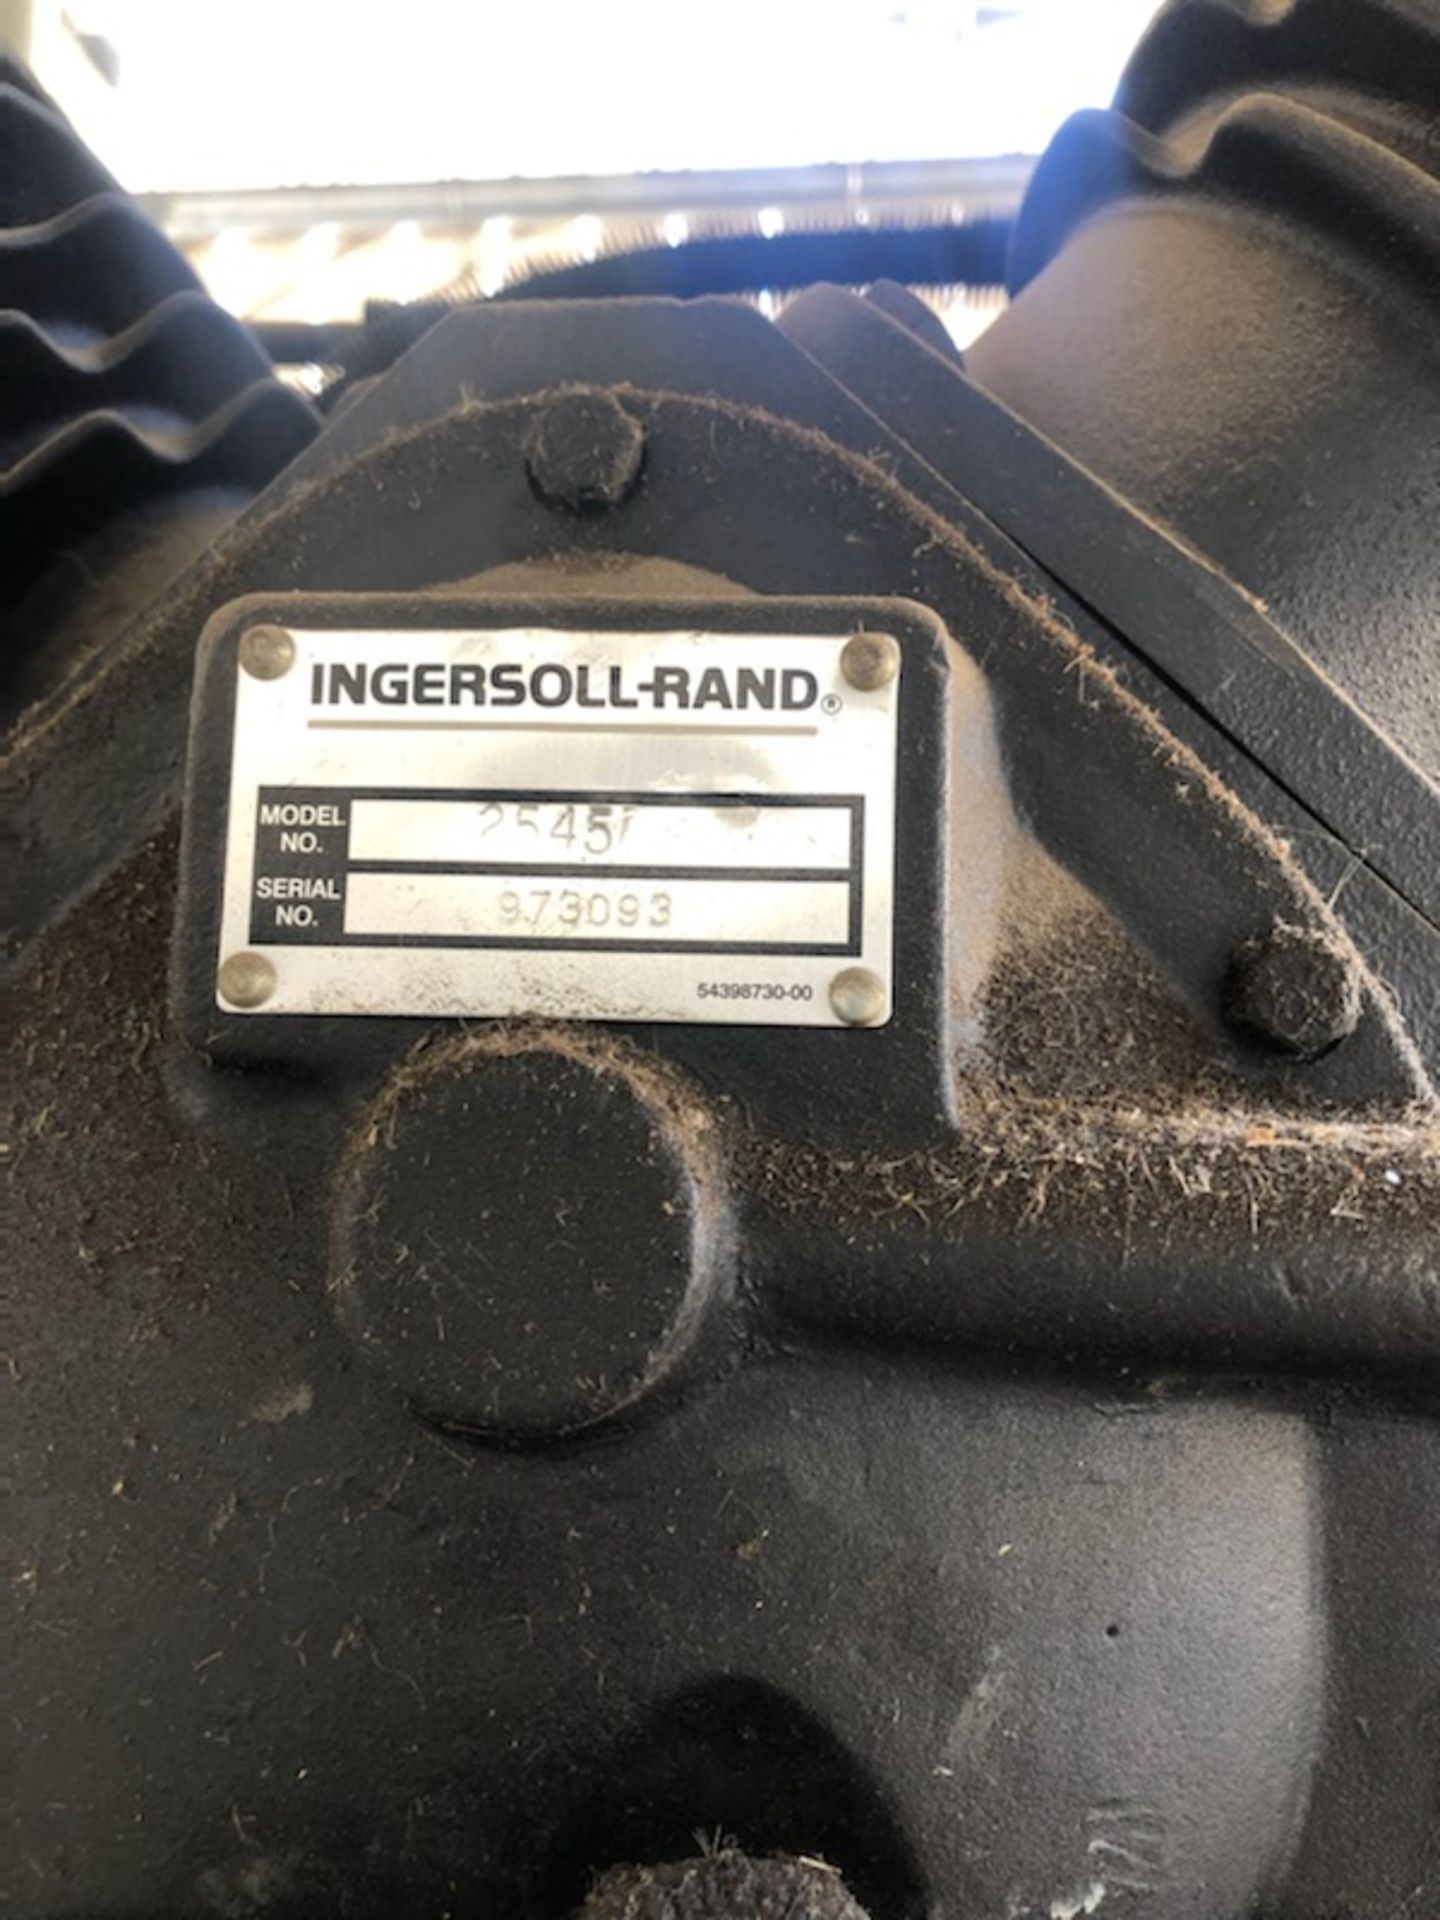 Ingersoll Rand Model 2545, 10-HP 120-Gallon Vertical Two-Stage Air Compressor, 230V, 3-PH, SN:973093 - Image 3 of 3